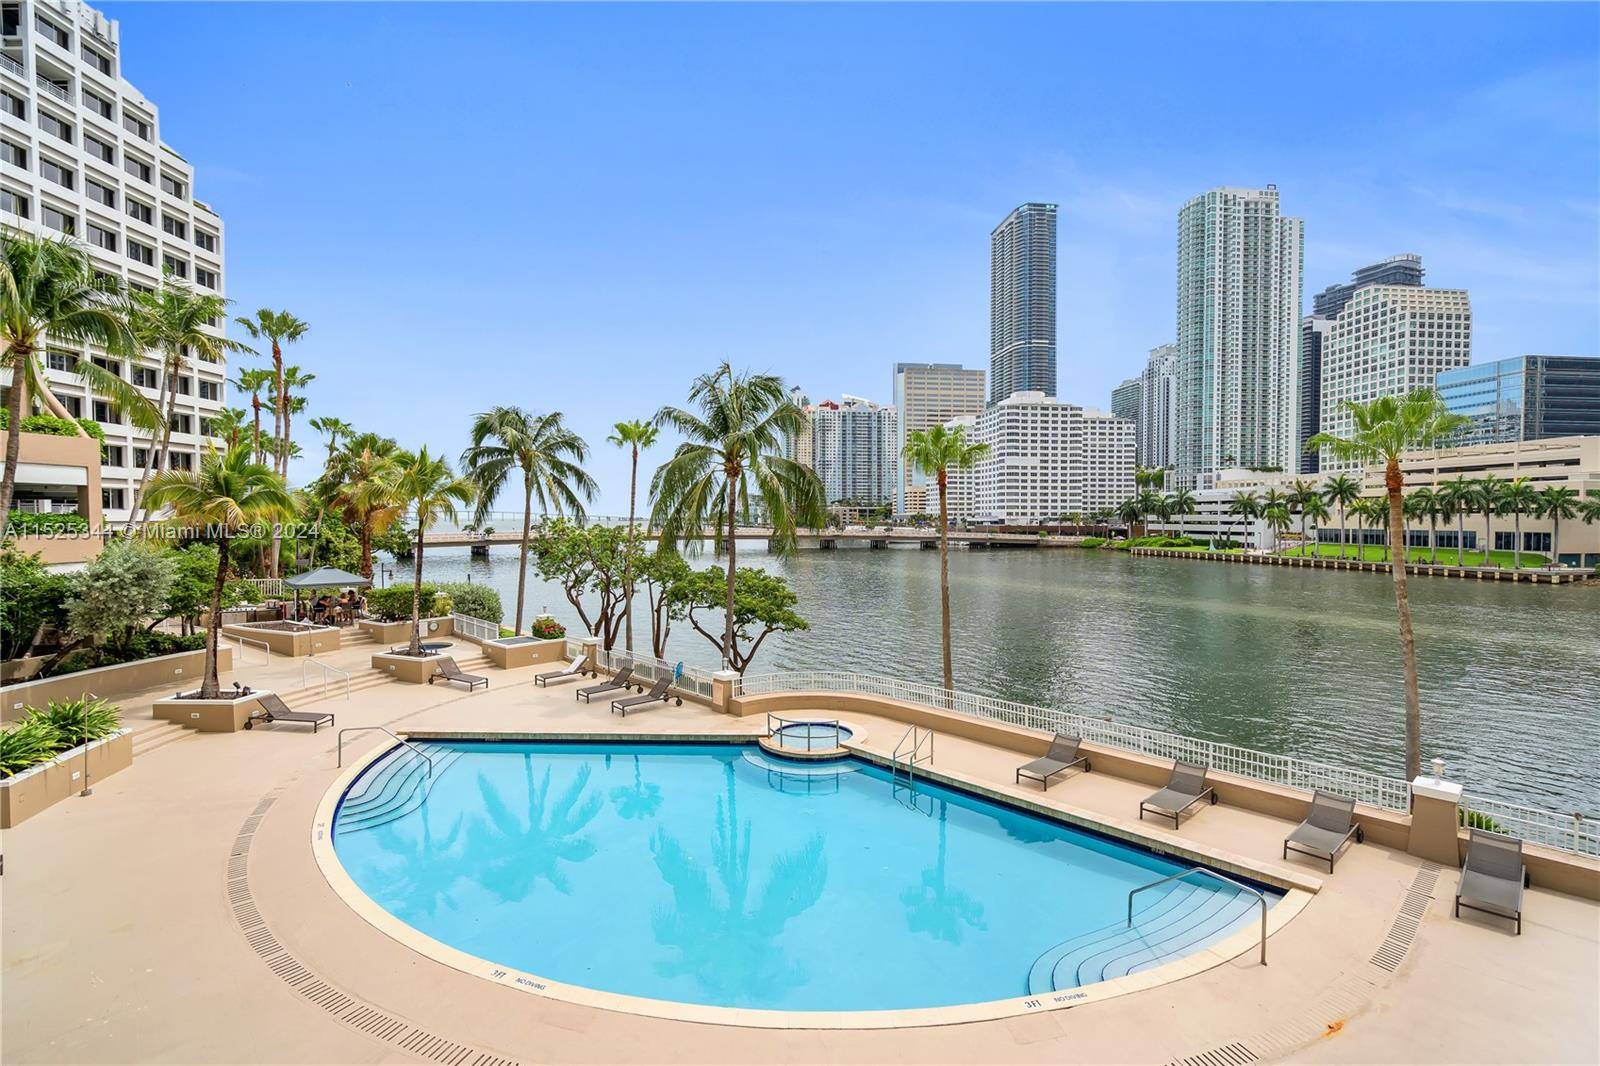 This is your chance to live in a secluded Luxury Island of Brickell Key where the views are mesmerizing.